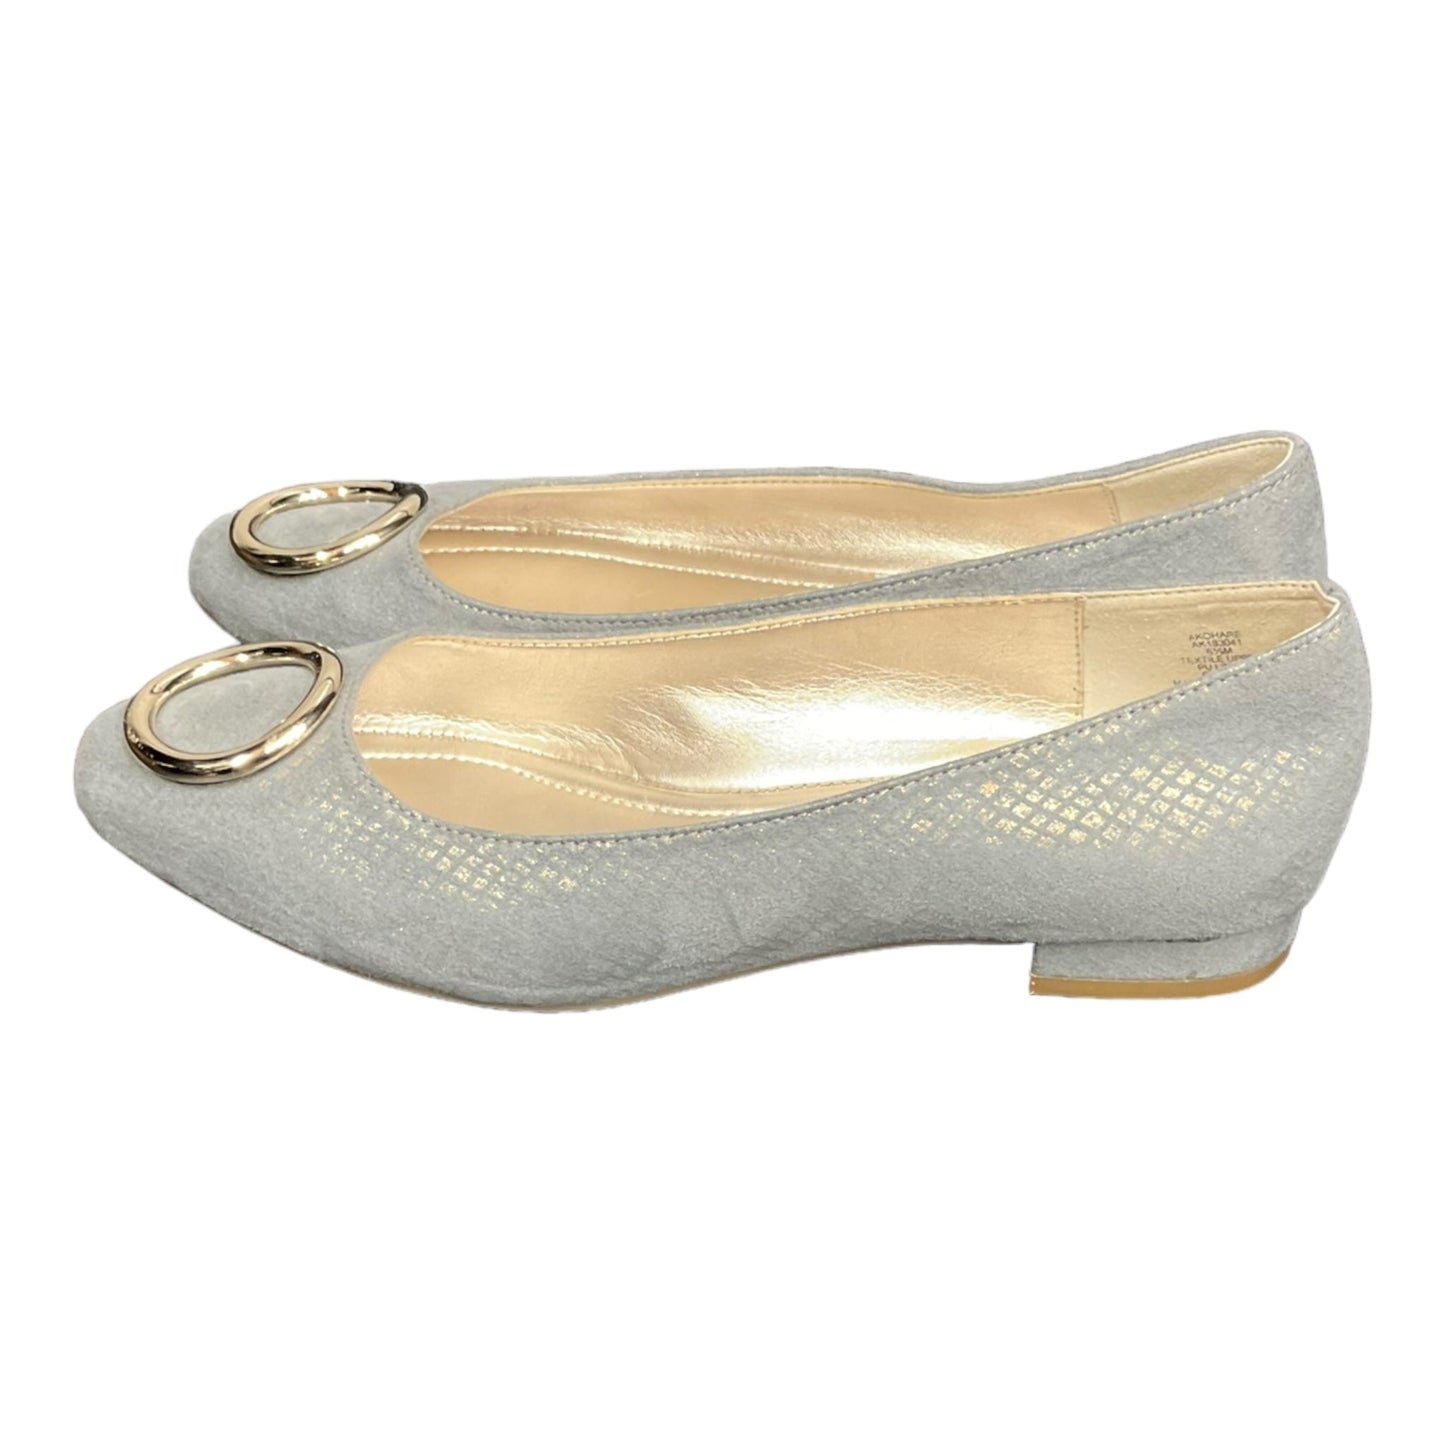 Shoes Flats By Anne Klein  Size: 6.5